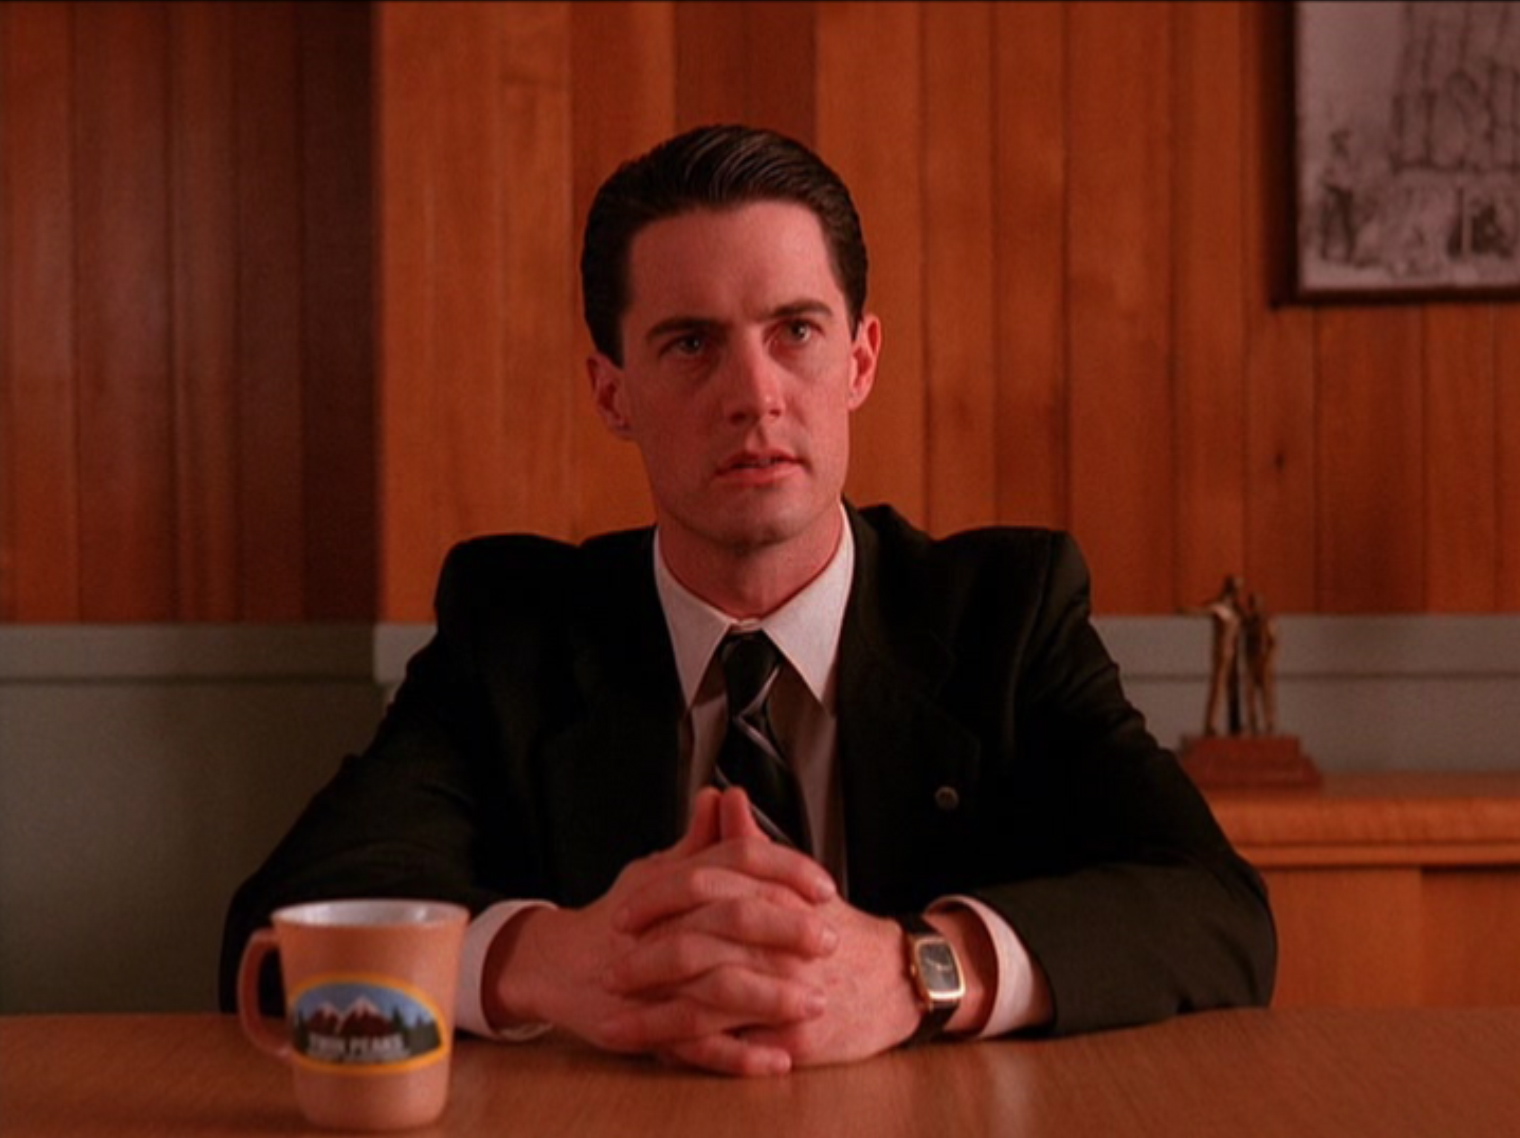 Agent Dale Cooper sitting with cup of coffee